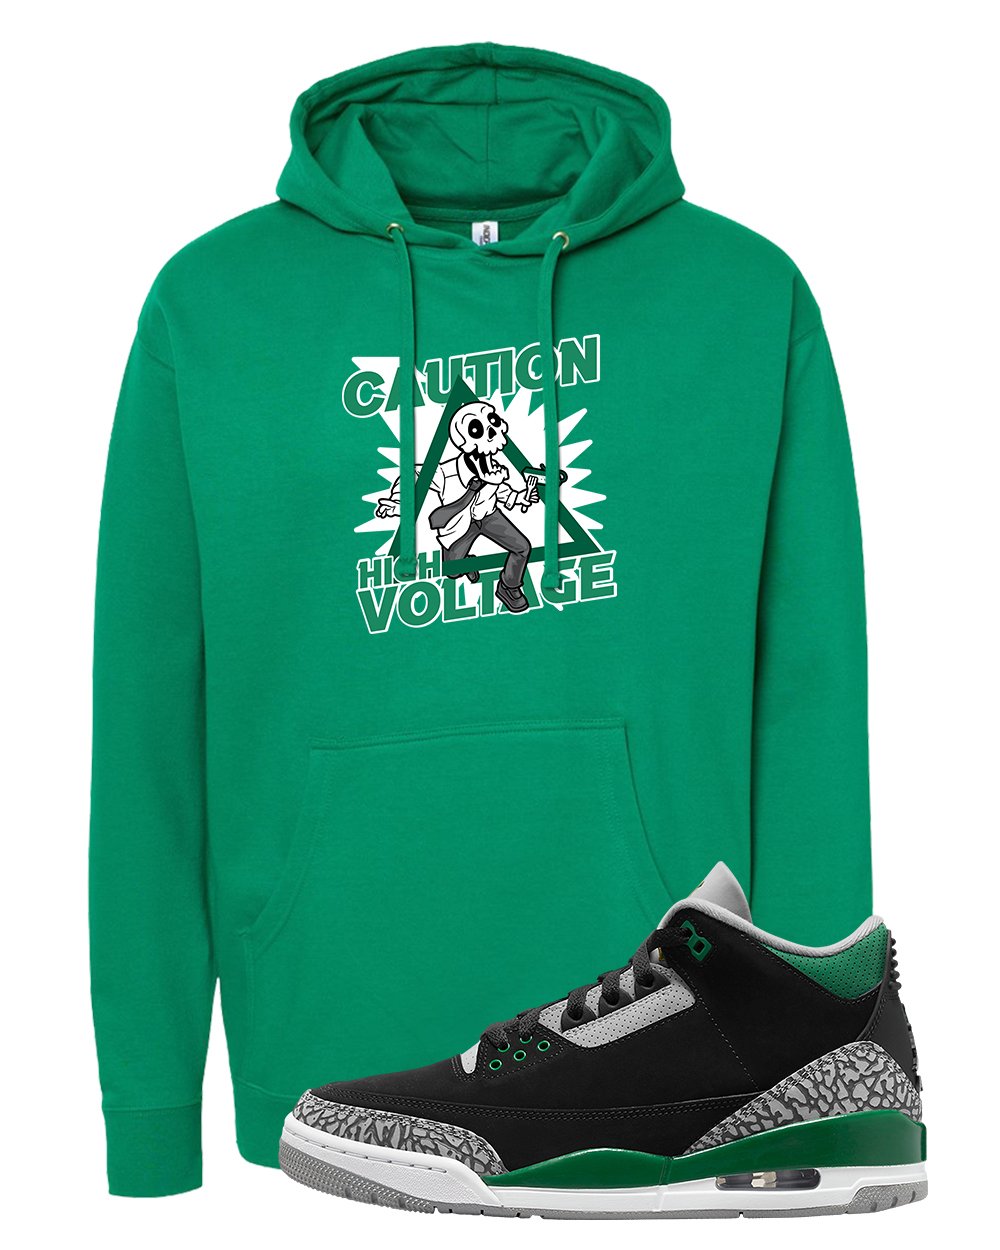 Pine Green 3s Hoodie | Caution High Voltage, Kelly Green